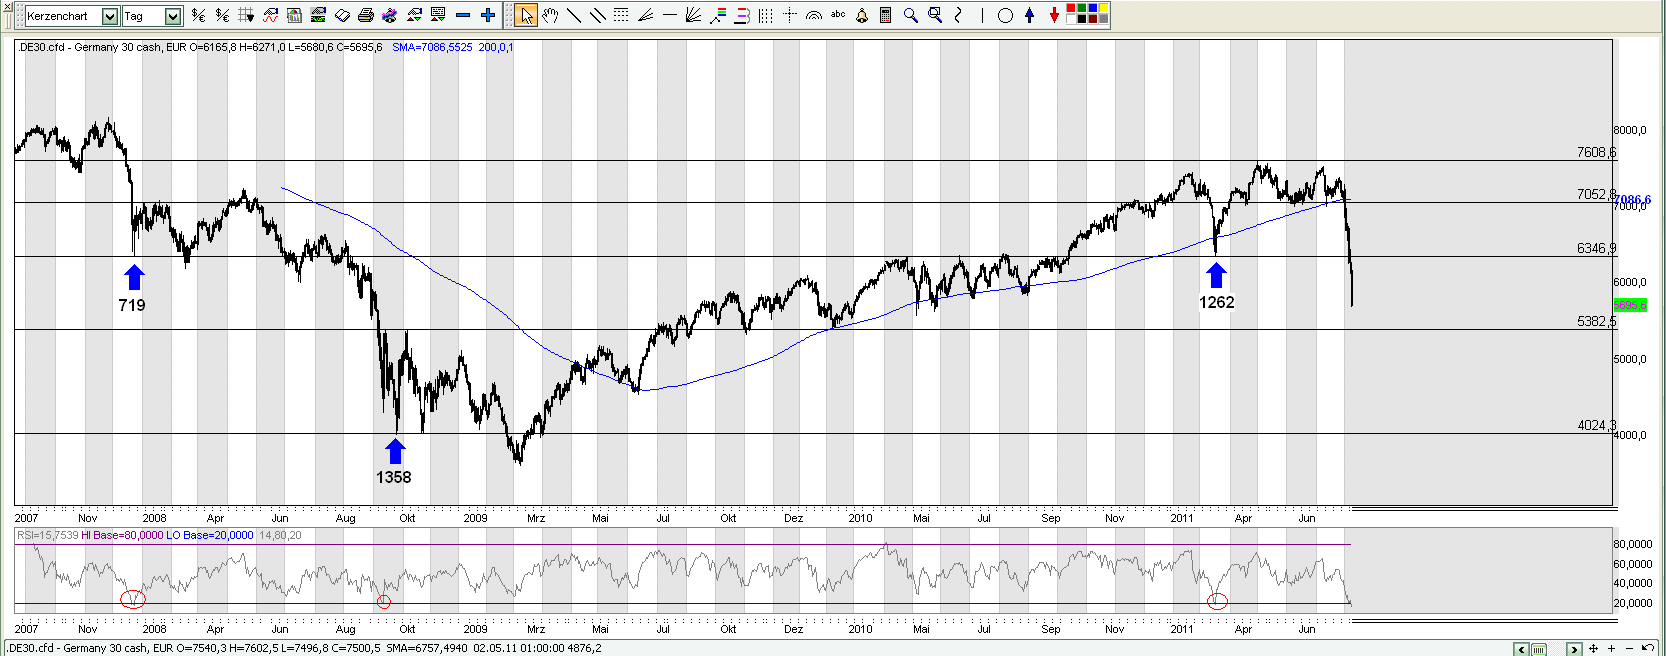 Quo Vadis Dax 2011 - All Time High? 428369